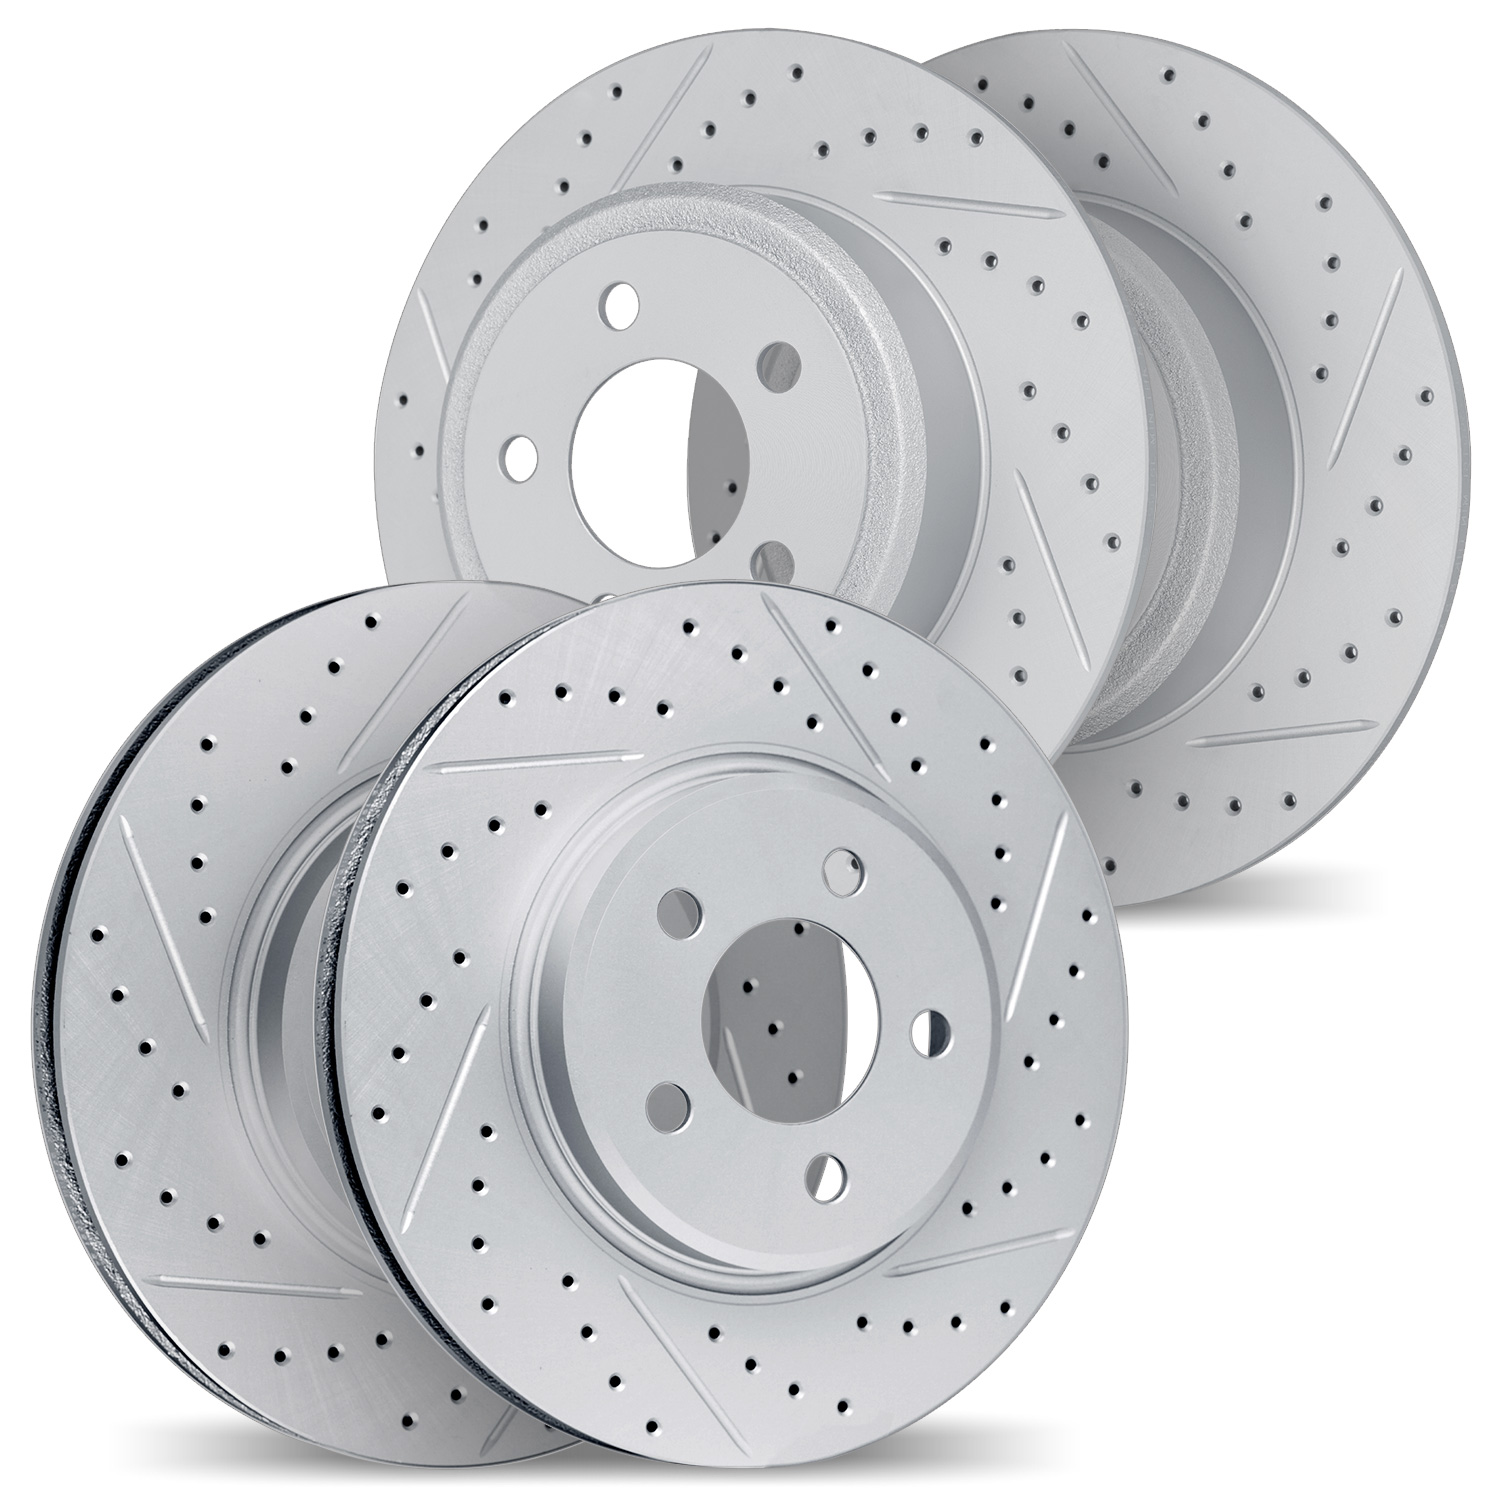 2004-40016 Geoperformance Drilled/Slotted Brake Rotors, 2001-2007 Mopar, Position: Front and Rear